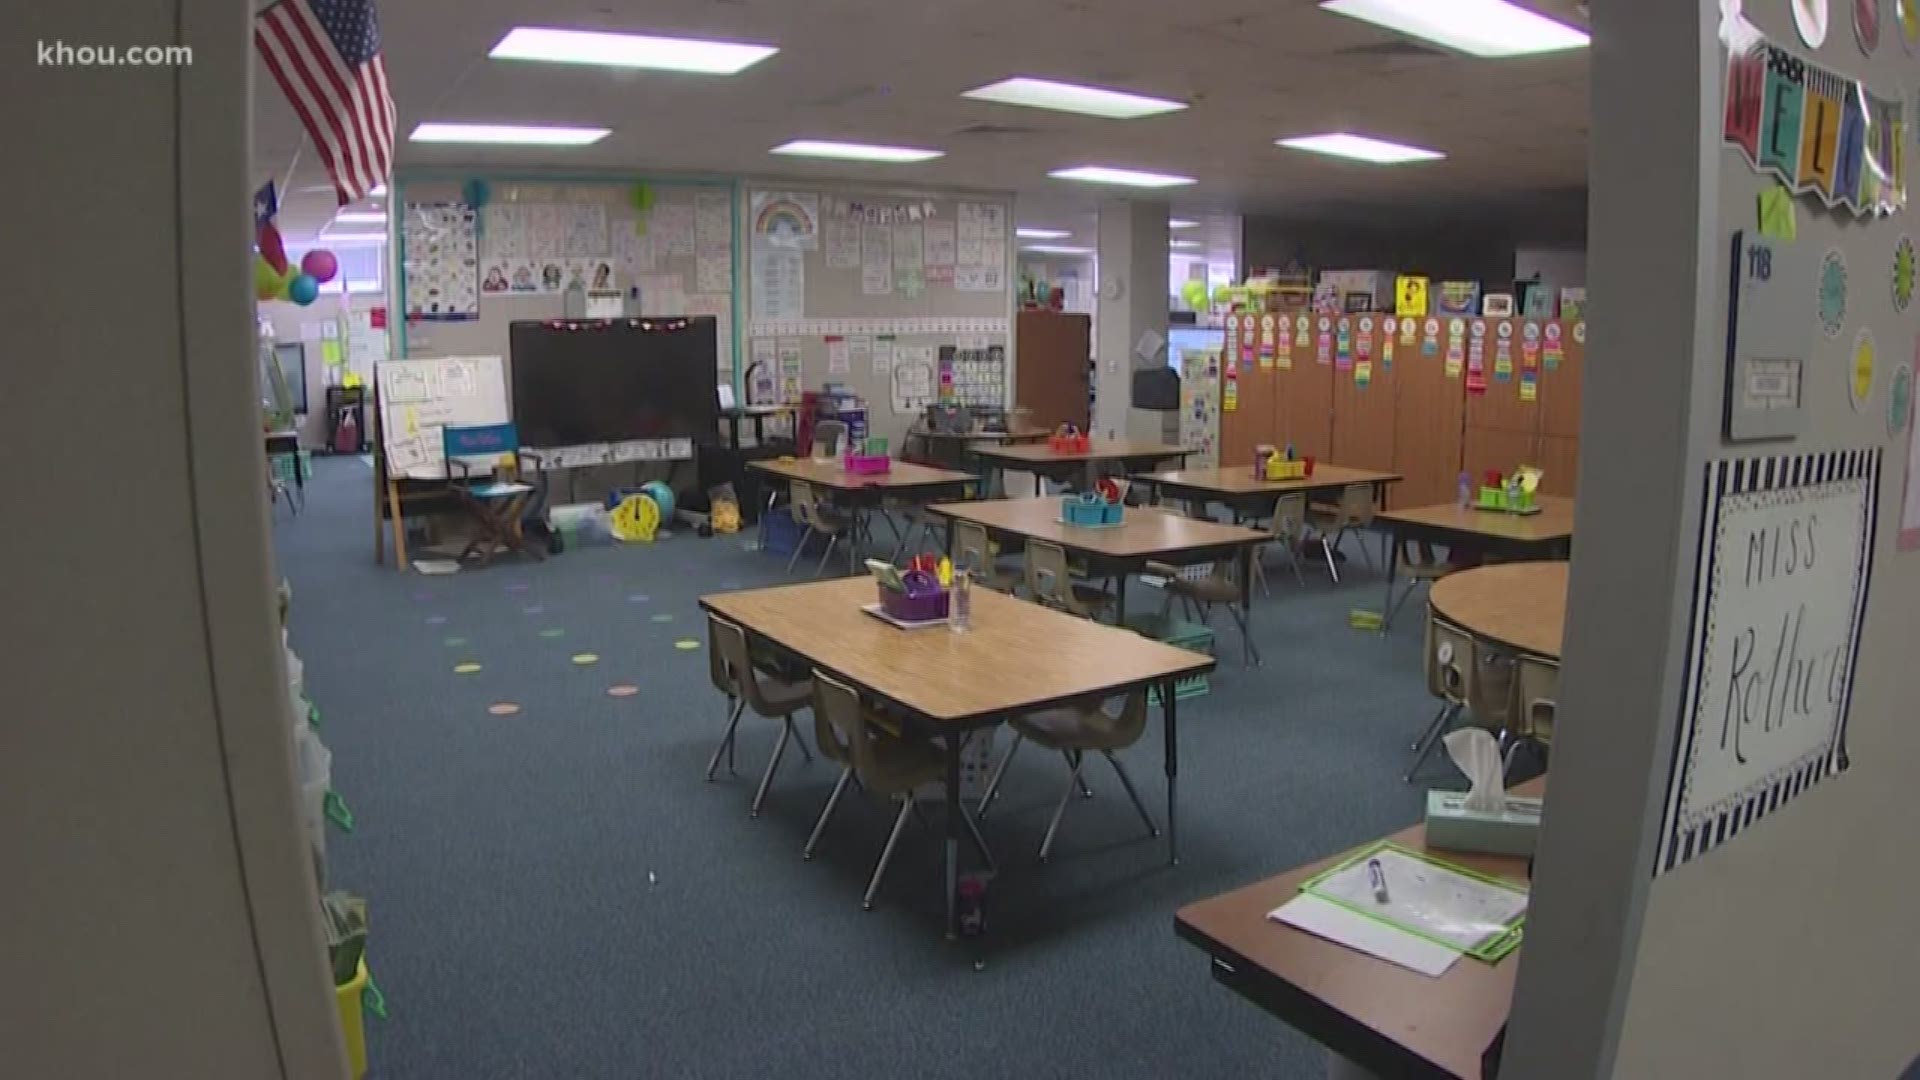 Every Texas Public School is required to have at least one lockdown drill each semester, including elementary schools. But a psychiatrist said training can lead to anxiety disorders.